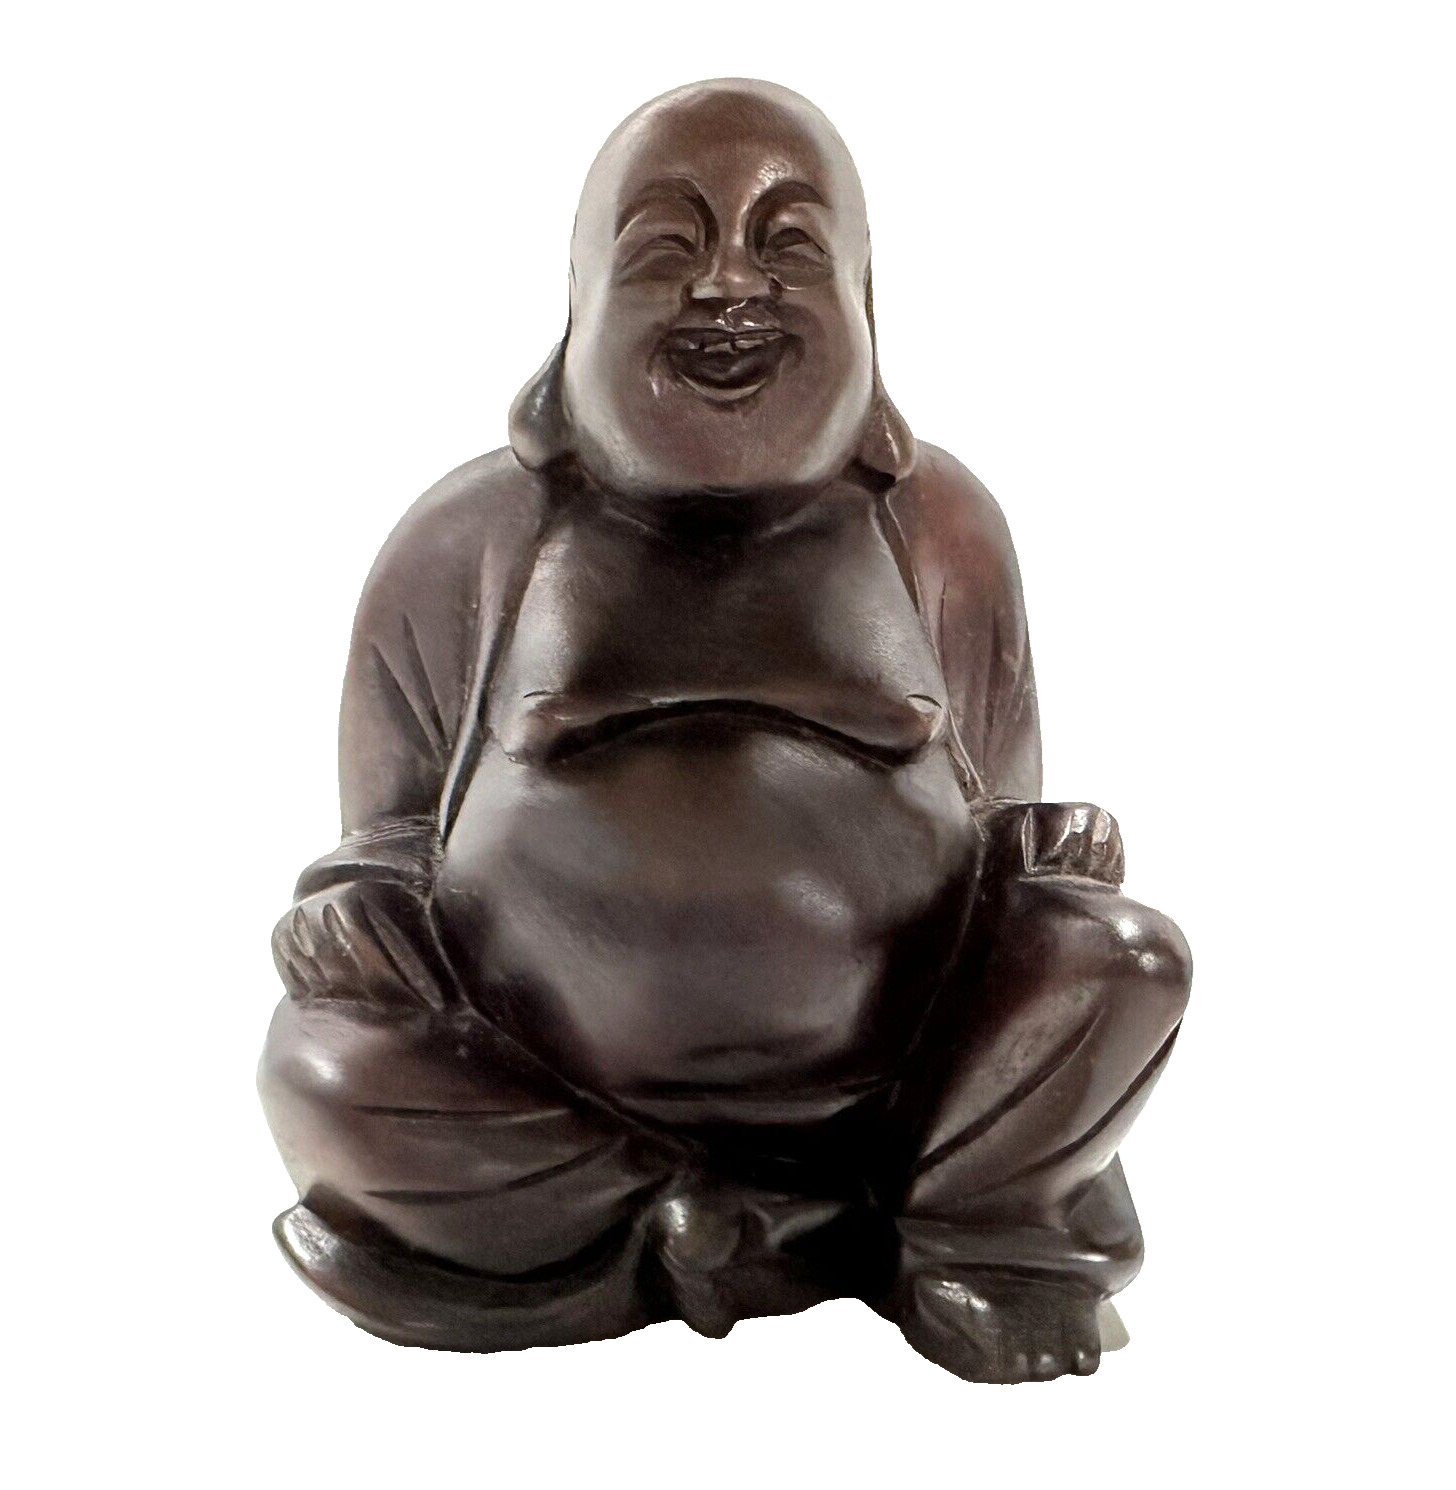 Vintage Buddha Laughing Wooden Figure Sitting 6 Inches Tall Carved Sculpture